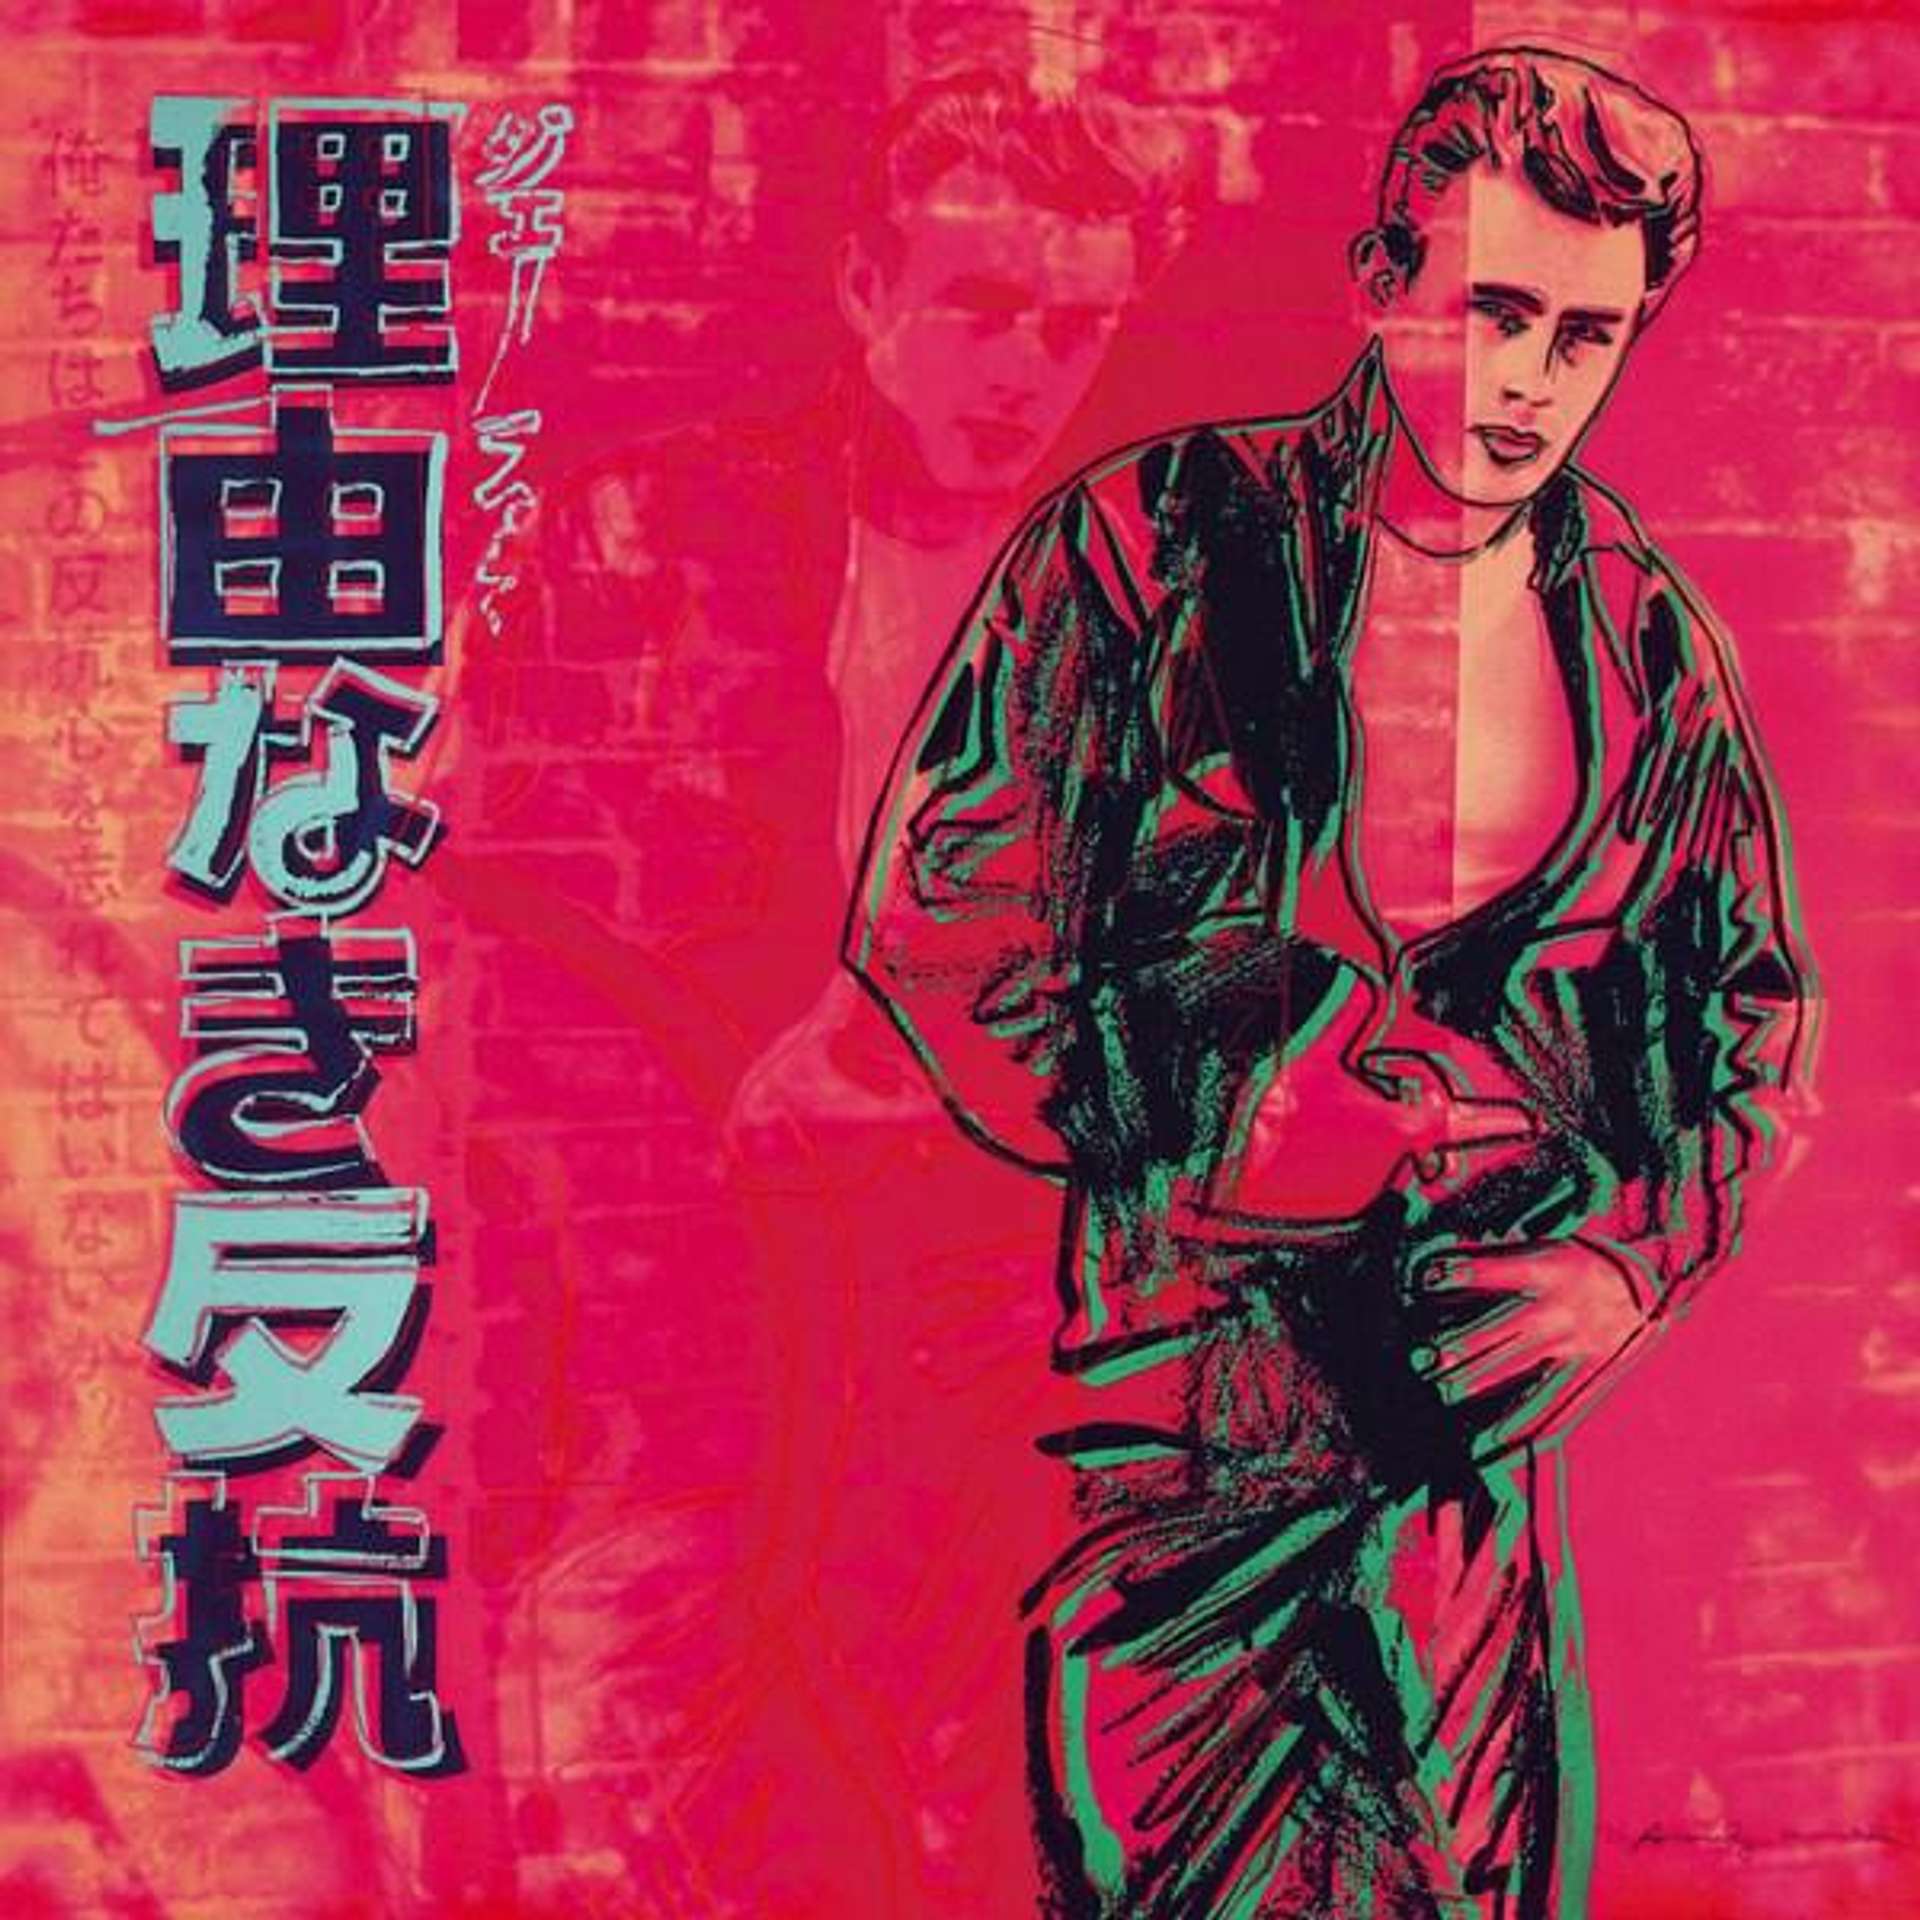 Rebel Without A Cause (James Dean) (F. & S. II.355) is a screen print by Andy Warhol that captures a Japanese film poster for the 1950s film, Rebel Without a Cause, depicting James Dean in a leather jacket against a red background.